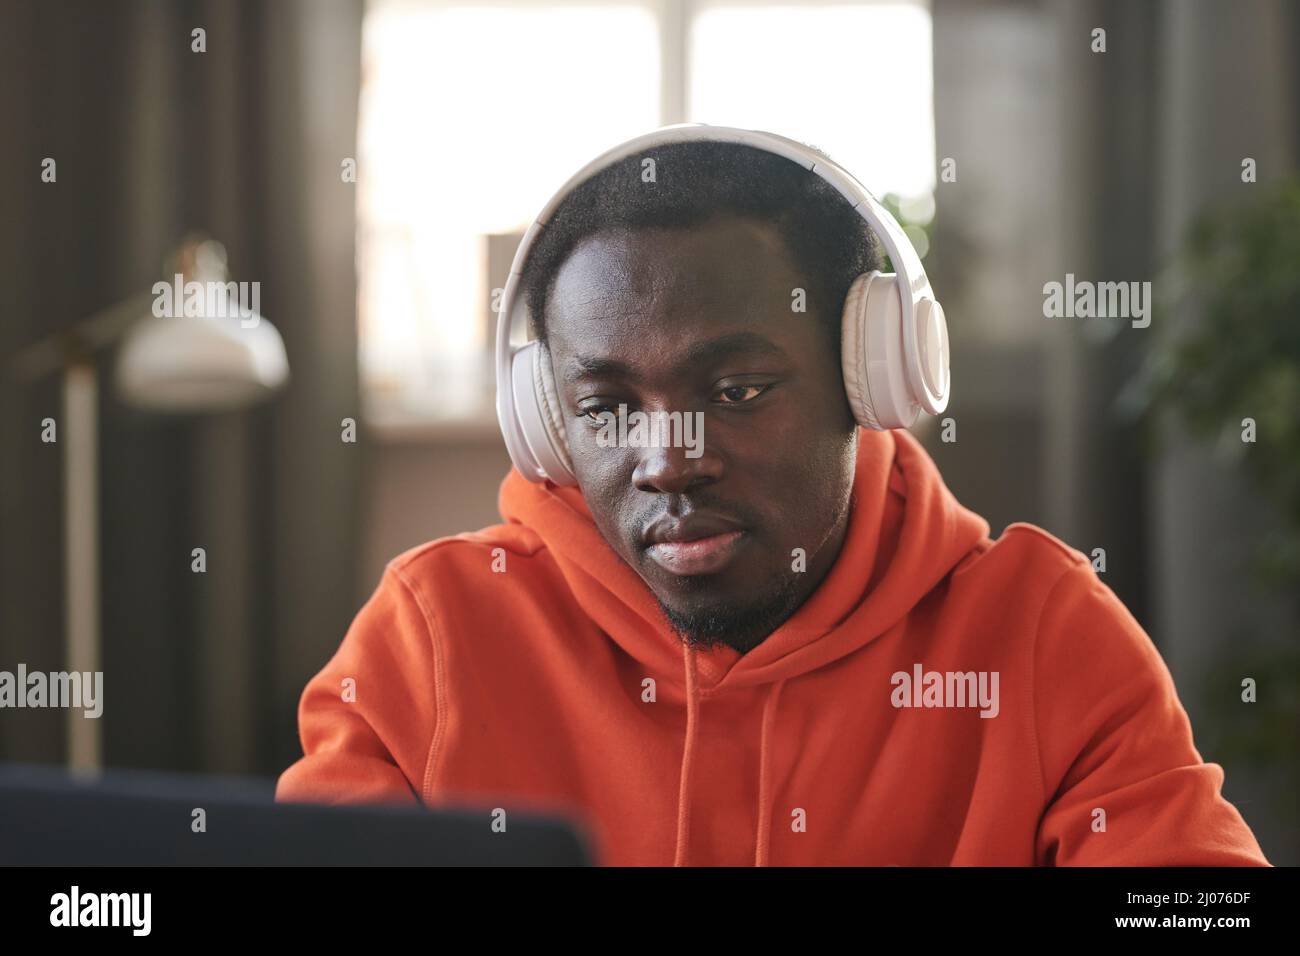 Horizontal medium close-up portrait of handsome young African American man wearing white headphones surfing internet on laptop Stock Photo